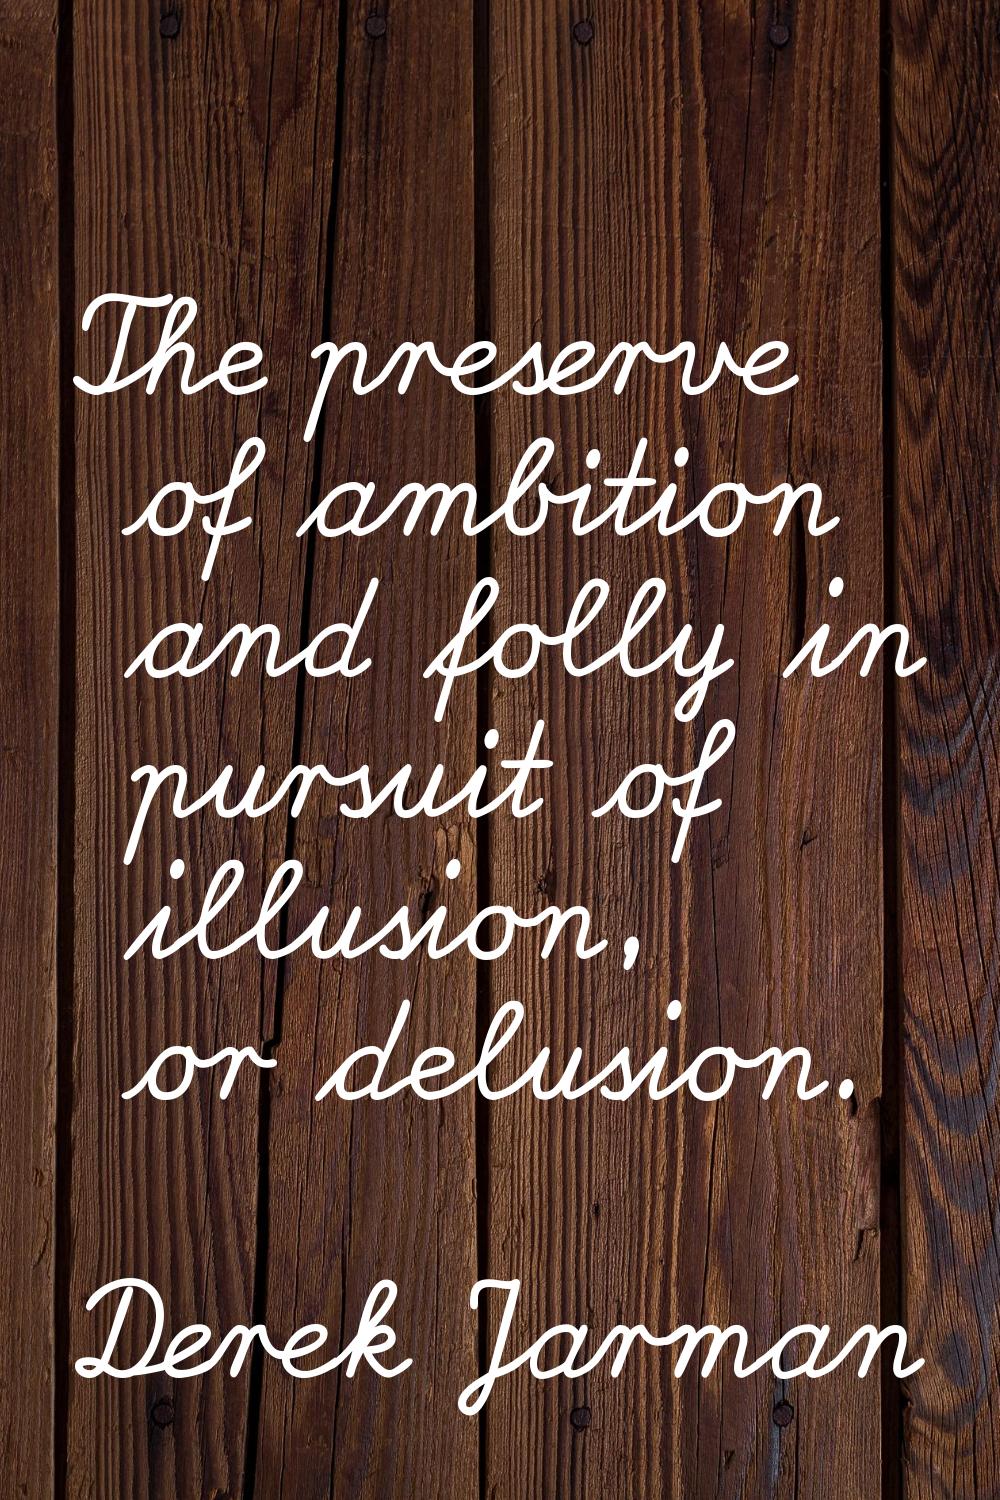 The preserve of ambition and folly in pursuit of illusion, or delusion.